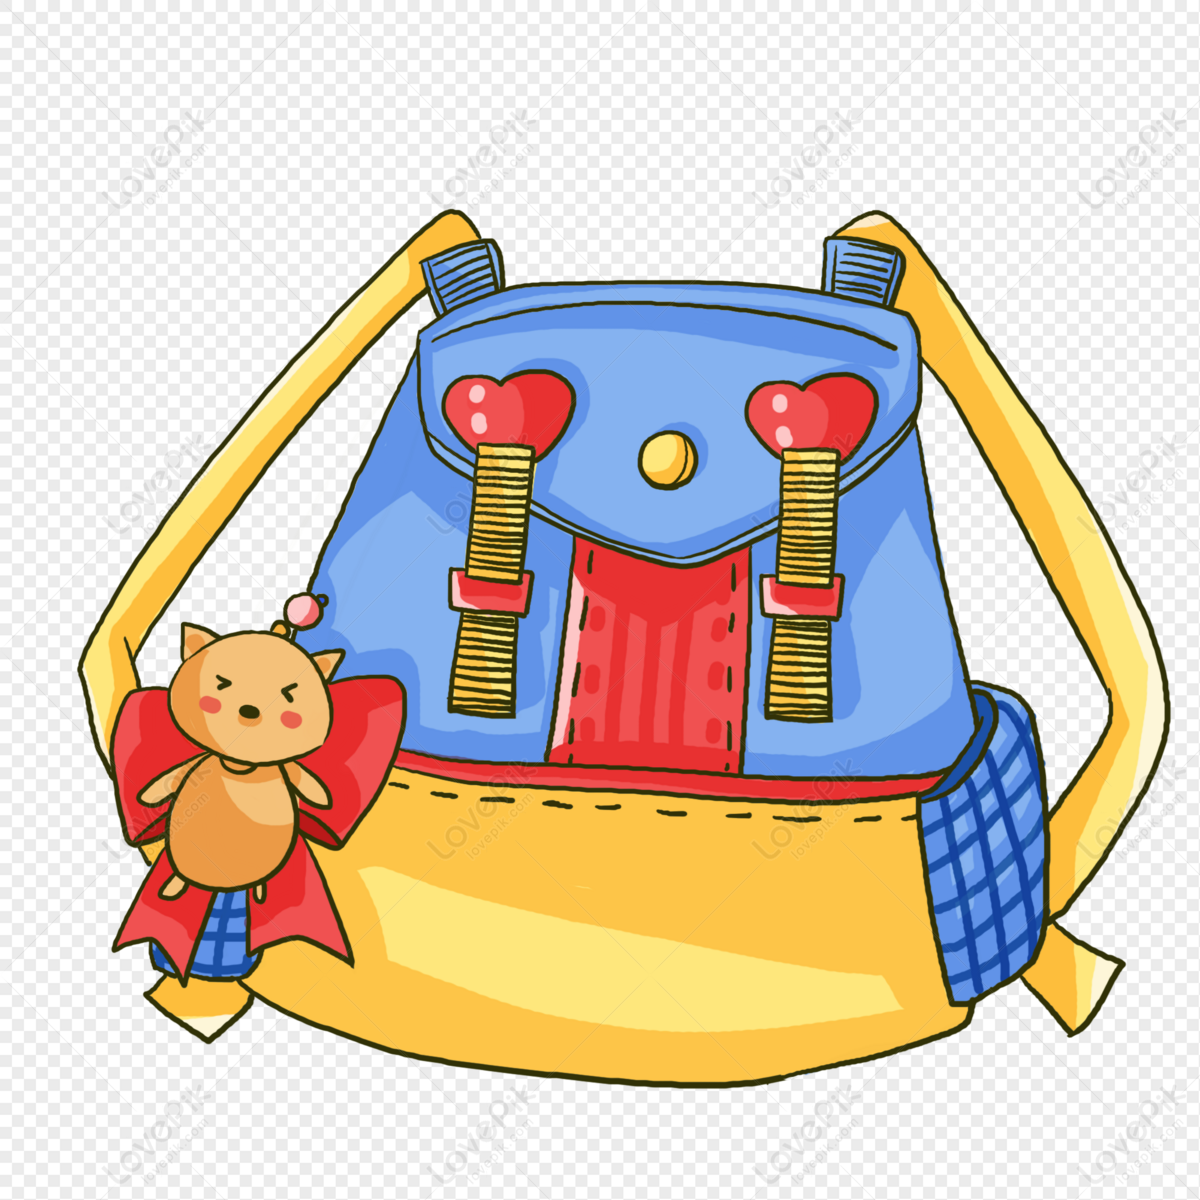 School Bag Clipart Images, Free Download